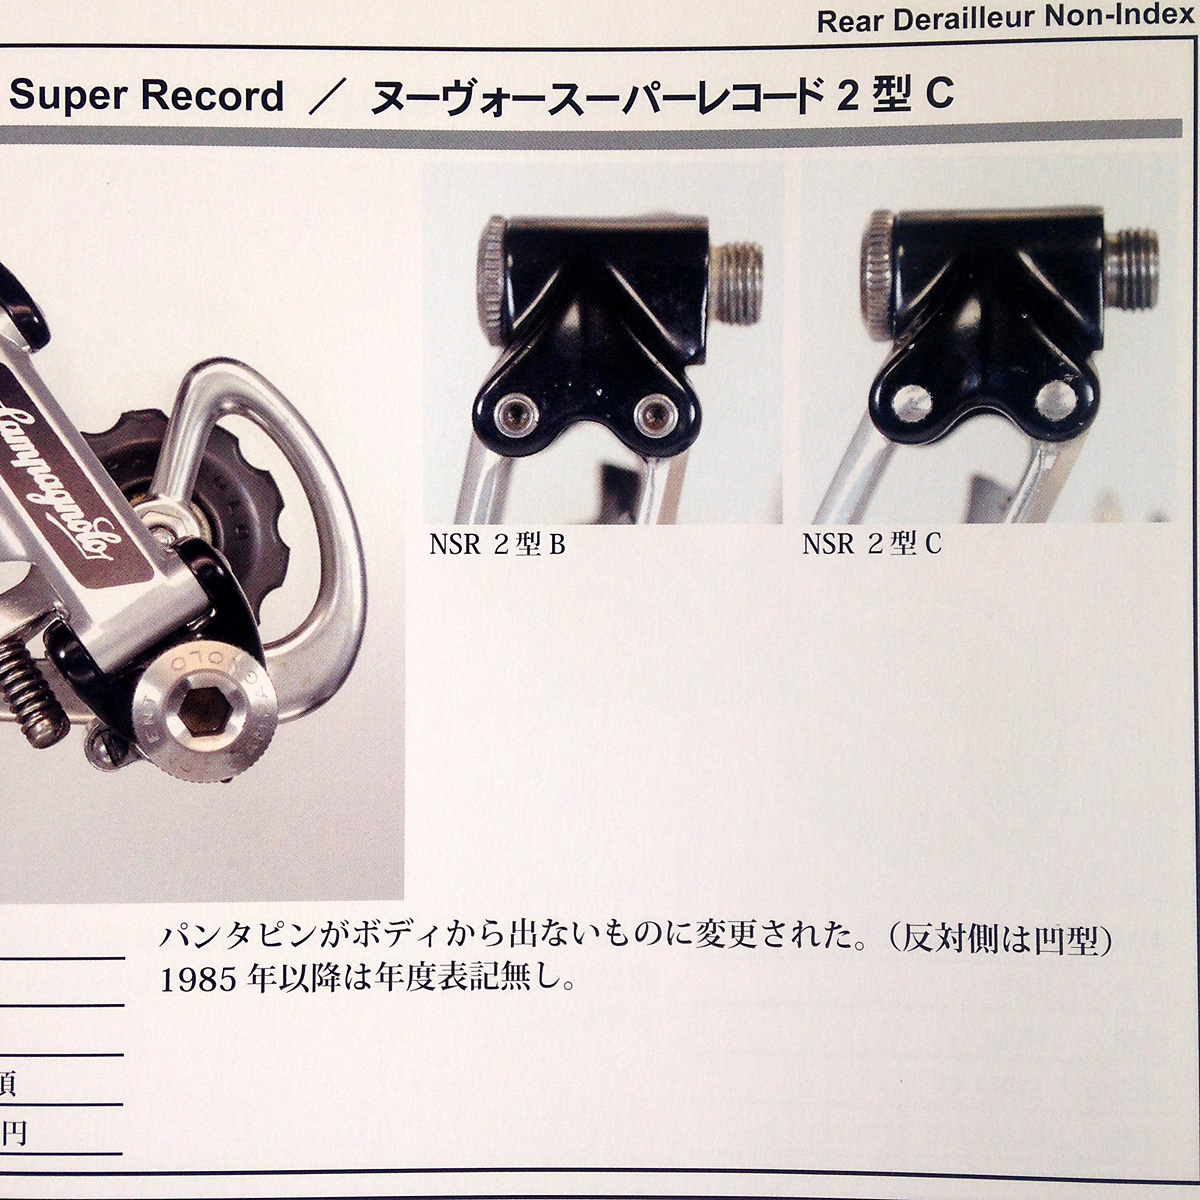 Campagnolo Nuovo Super Record - details of different versions 